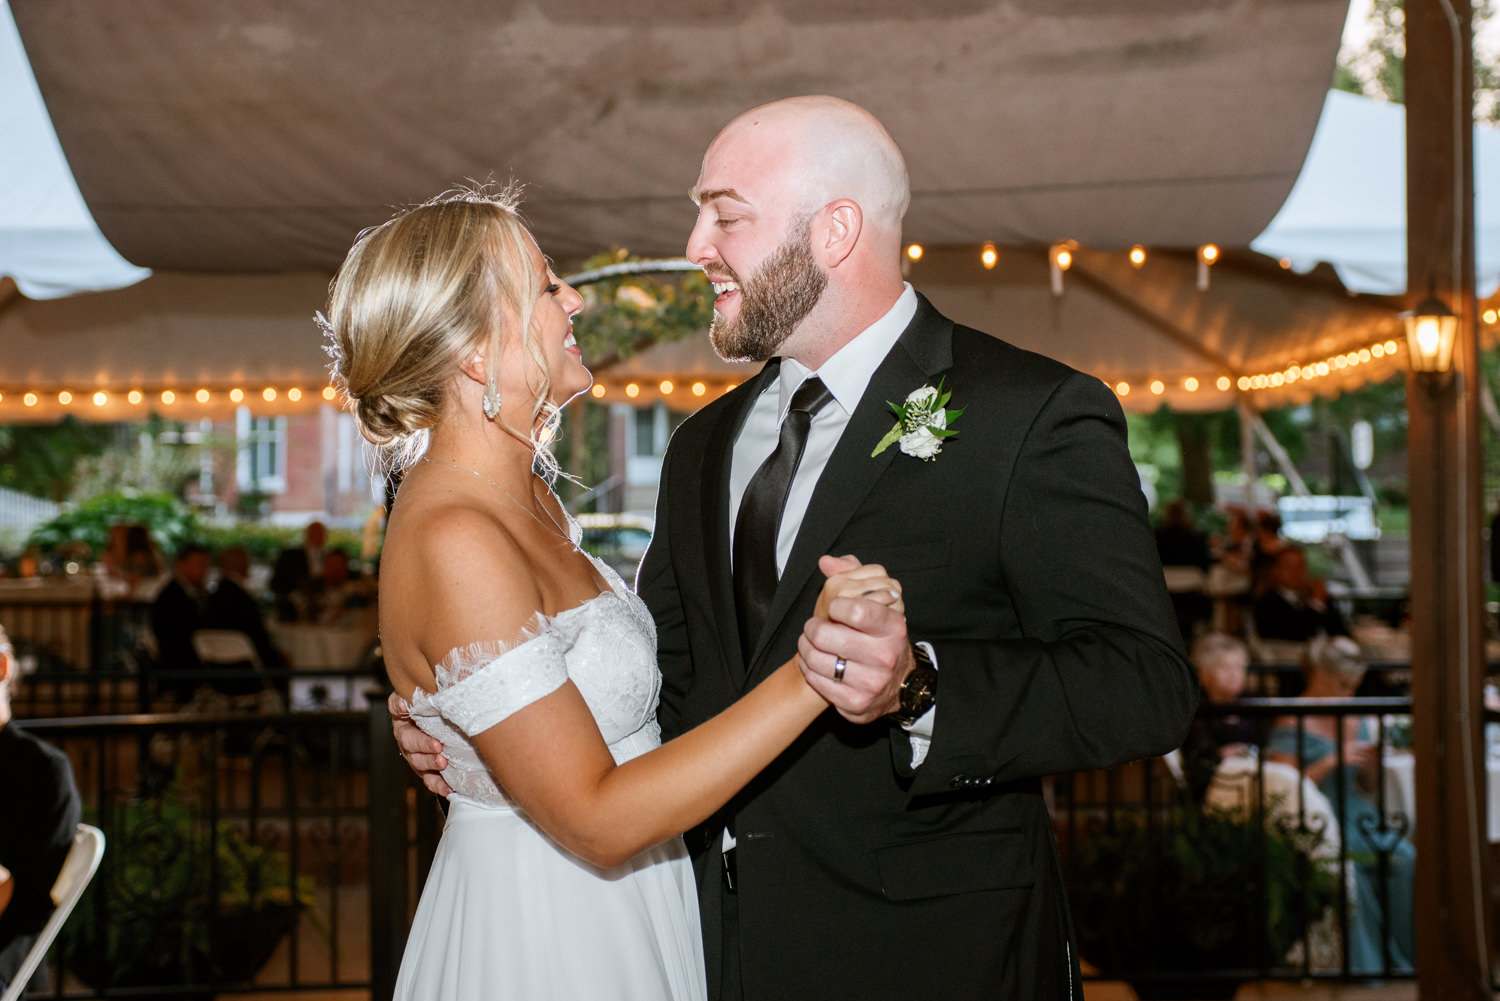 Bride and Groom dancing at St. Louis wedding venue Lemp Mansion; St. Louis wedding photography